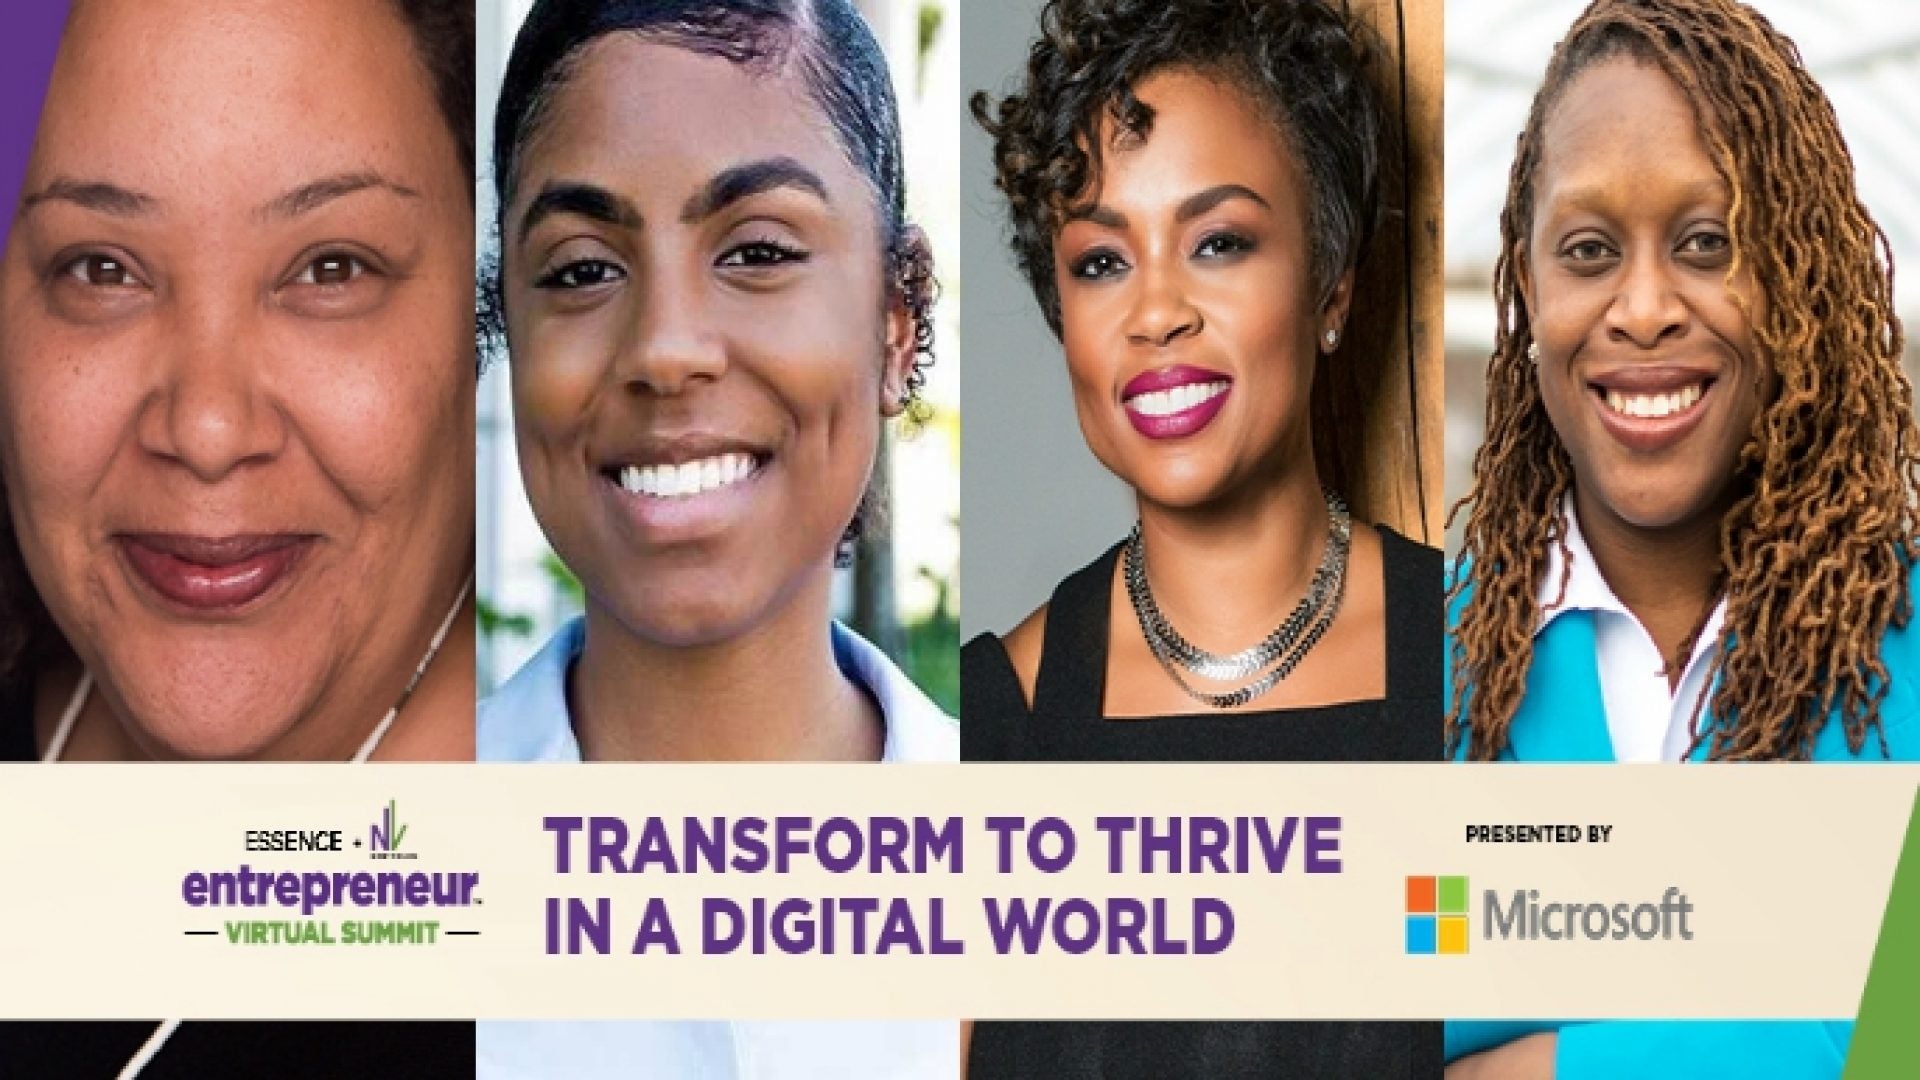 How To Transform And Thrive In Today's Digital World As An Entrepreneur